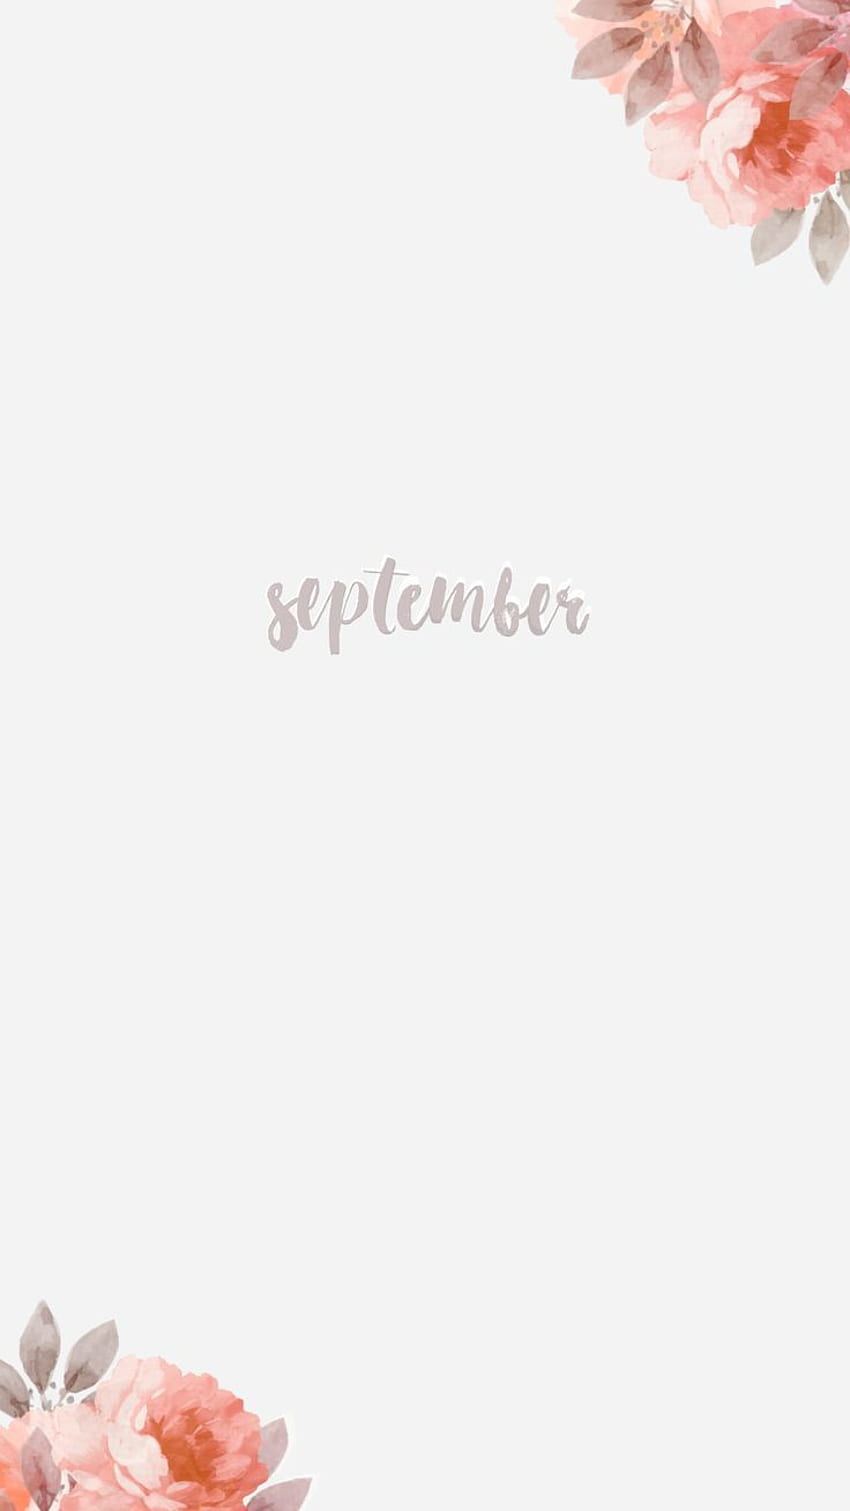 70 Hello September Images Pictures Quotes And Pics 2022  September  wallpaper Hello september images September images